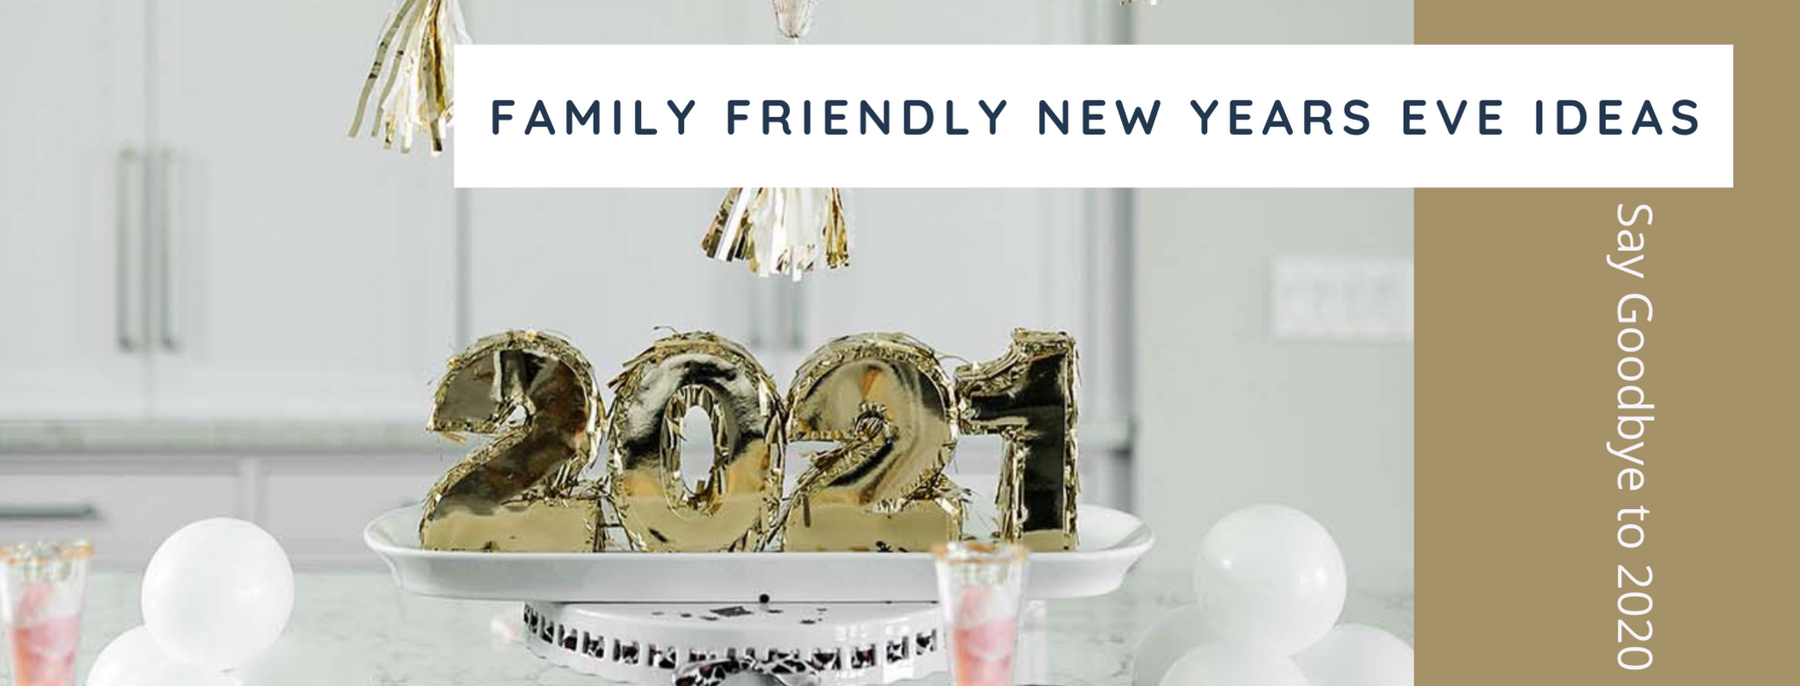 New Years Eve Party Ideas for the Family